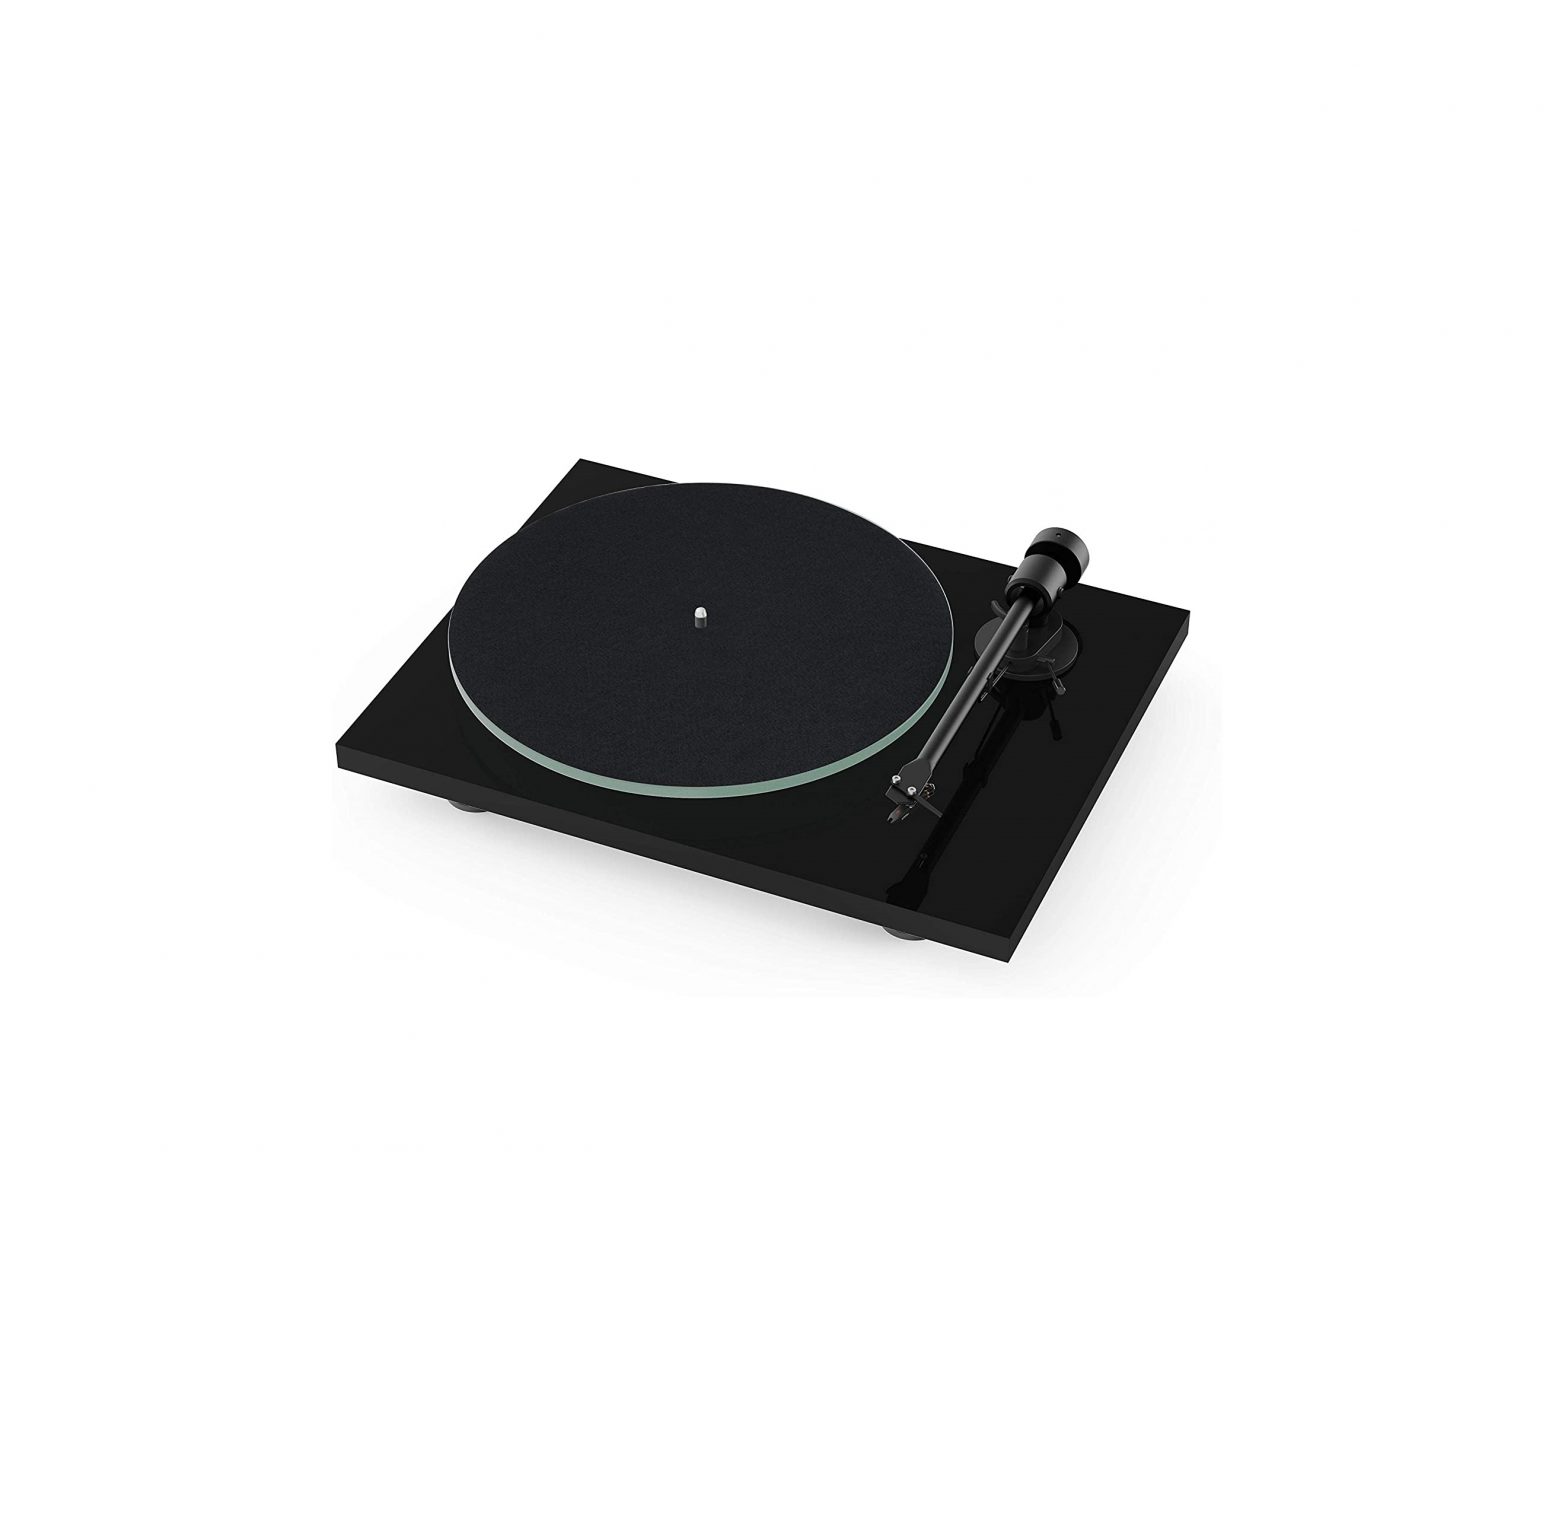 Pro-Ject Turntable with Built-in Preamp and Electronic Speed Instructions